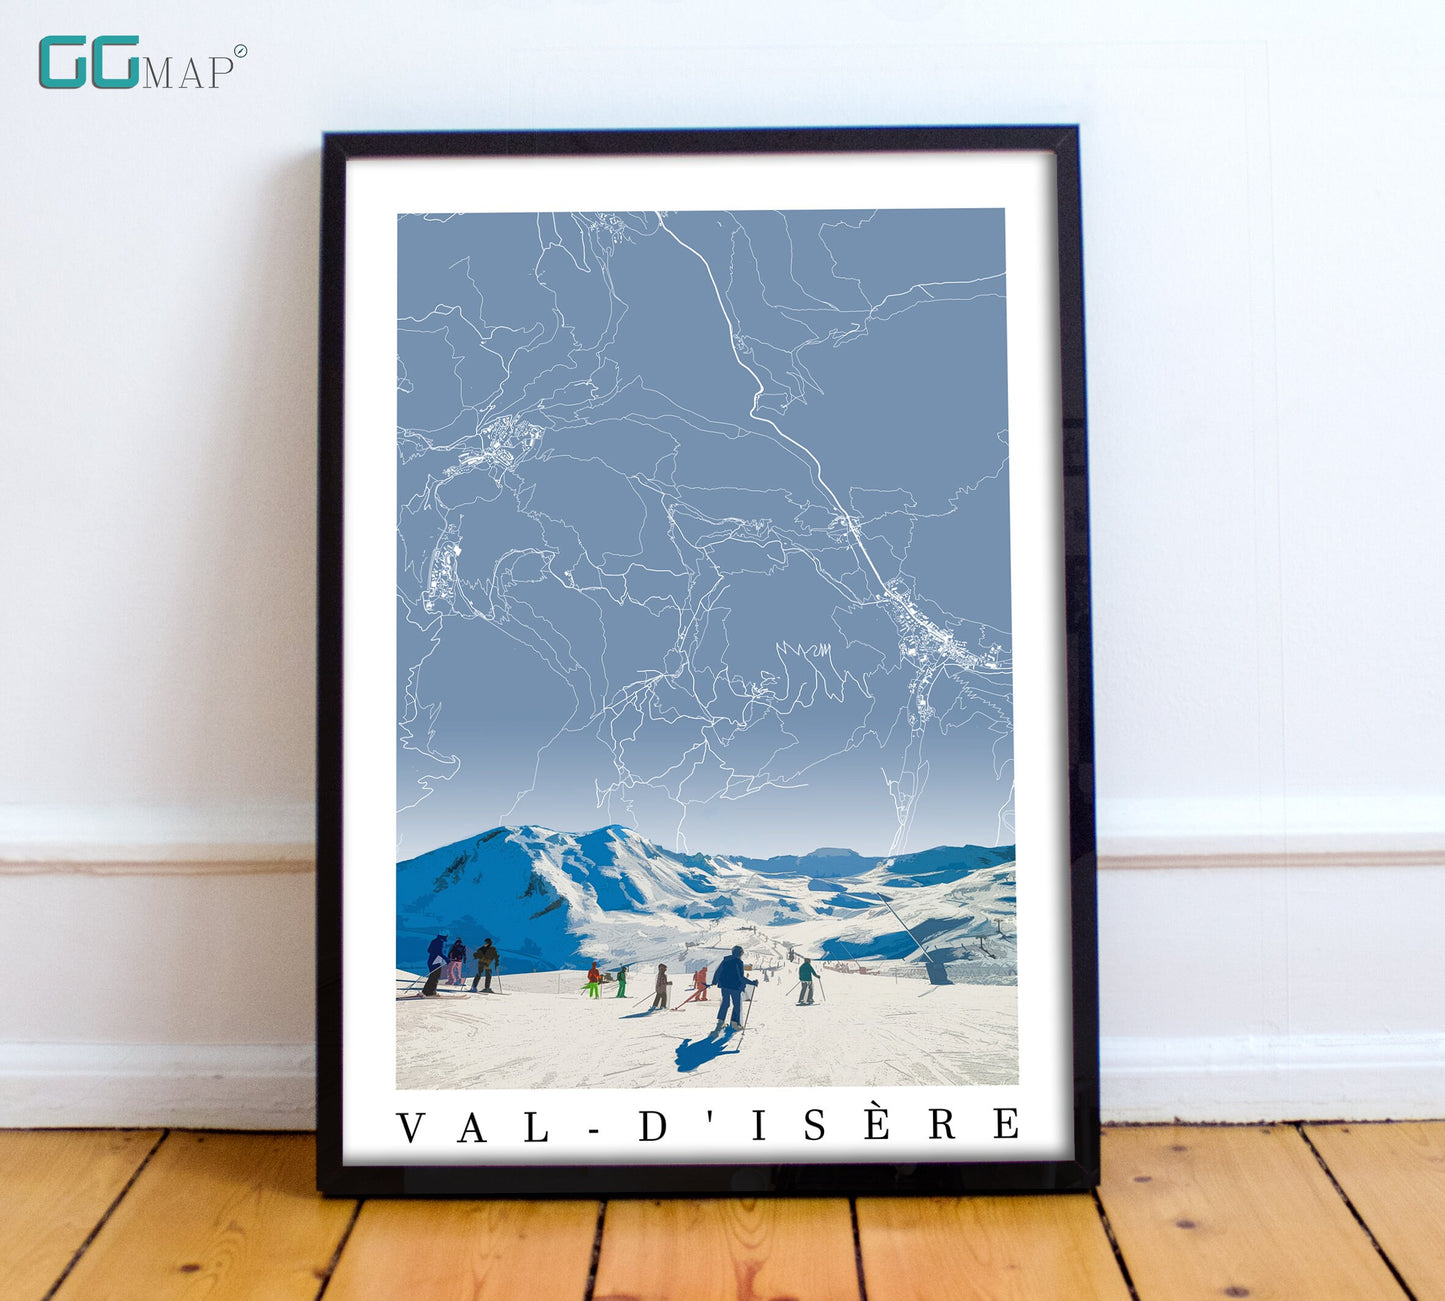 City map of VAL D'ISERE - Val D'isere skiing - Val D'isere skiing adventure - Val D'isere gift - Val D'isere World cup - Skiing poster